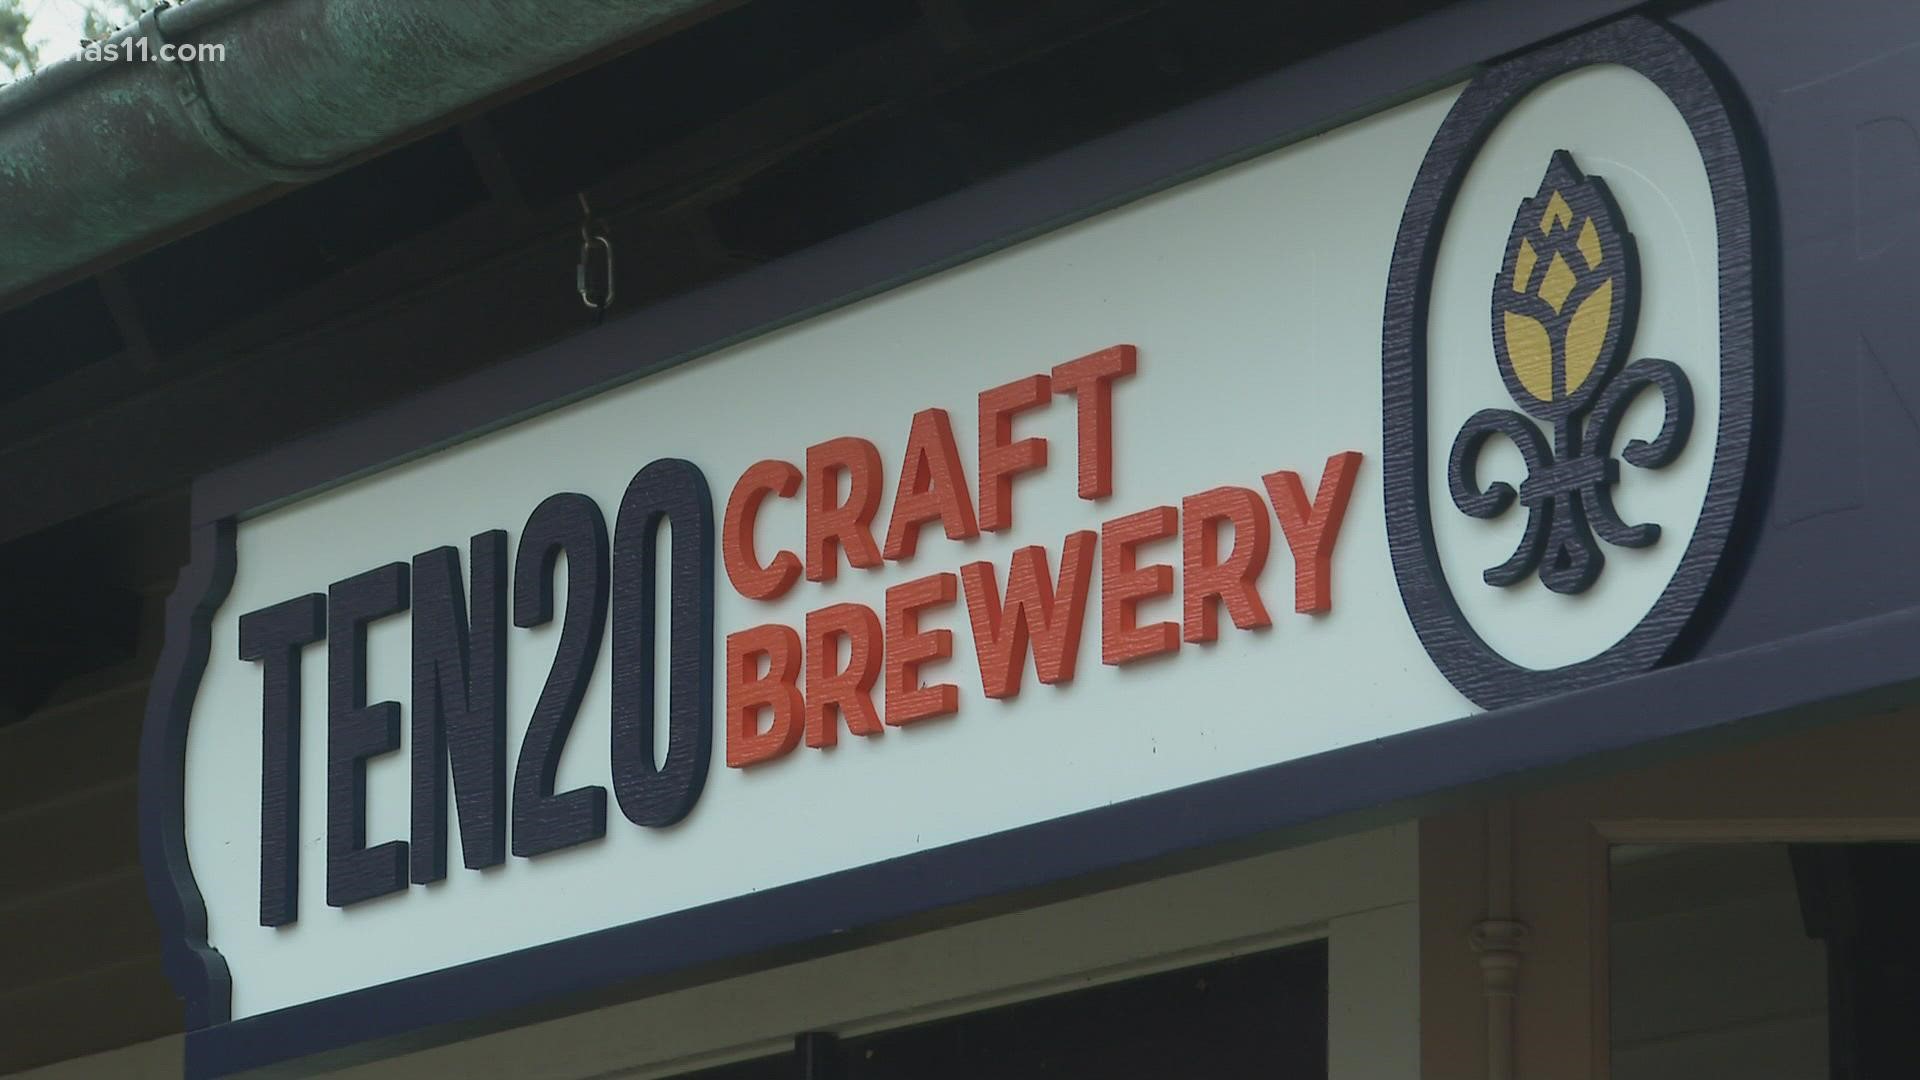 TEN20 Craft Brewery's new location is in Anchorage, KY. The satellite taproom will be open at 3 p.m. every weekday and noon on weekends.